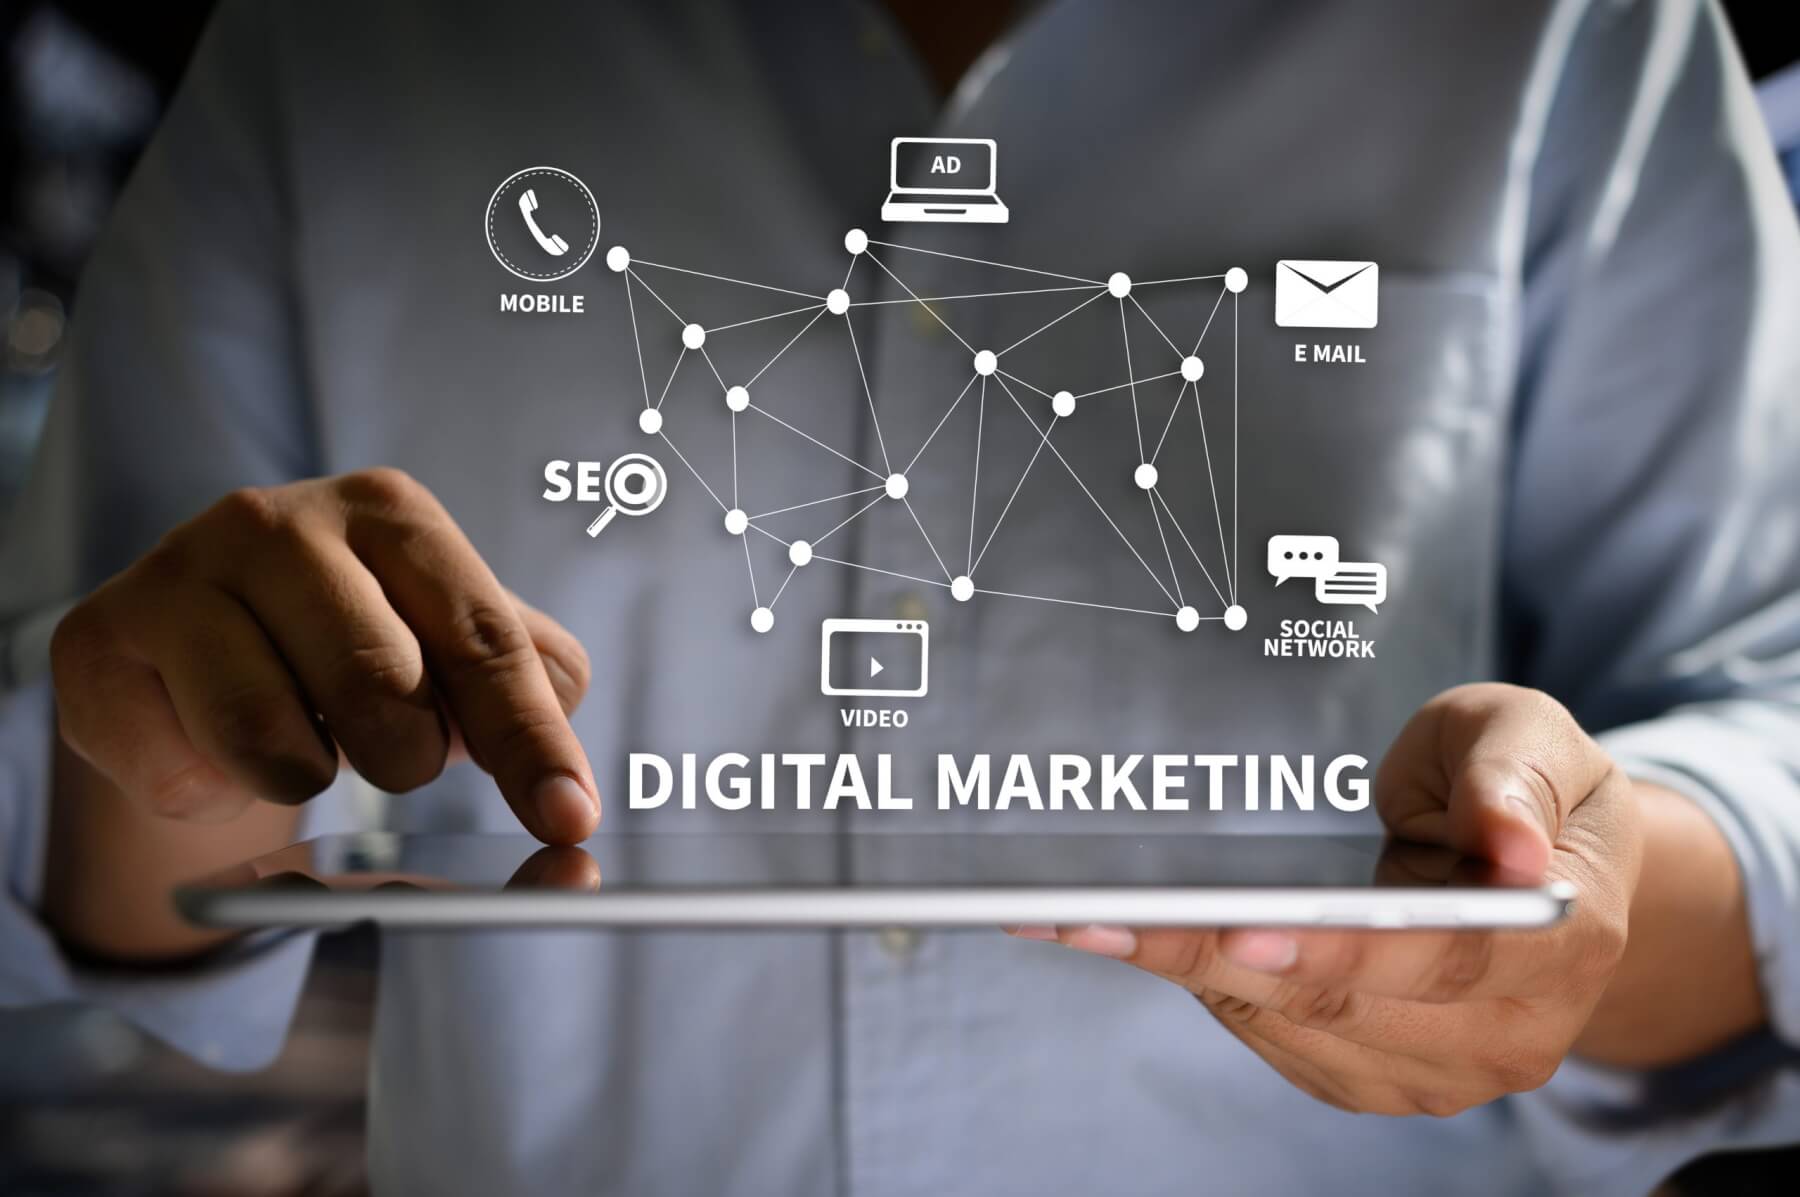 Digital Marketing: Basic concepts that you should know if you have an online  business - Cute Digital Media